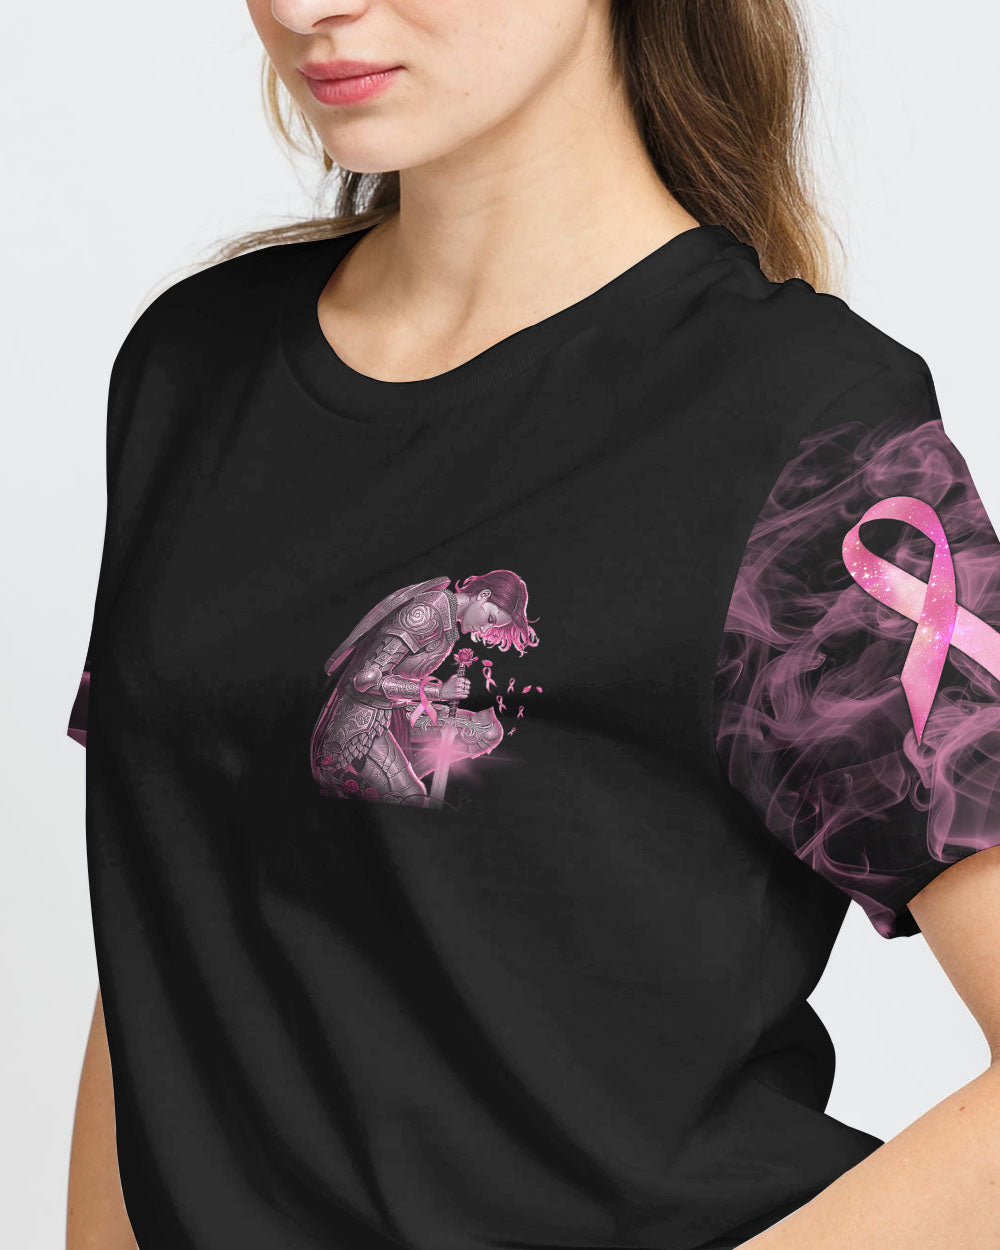 It Ain't Over Until God Says It's Over Women's Breast Cancer Awareness Tshirt